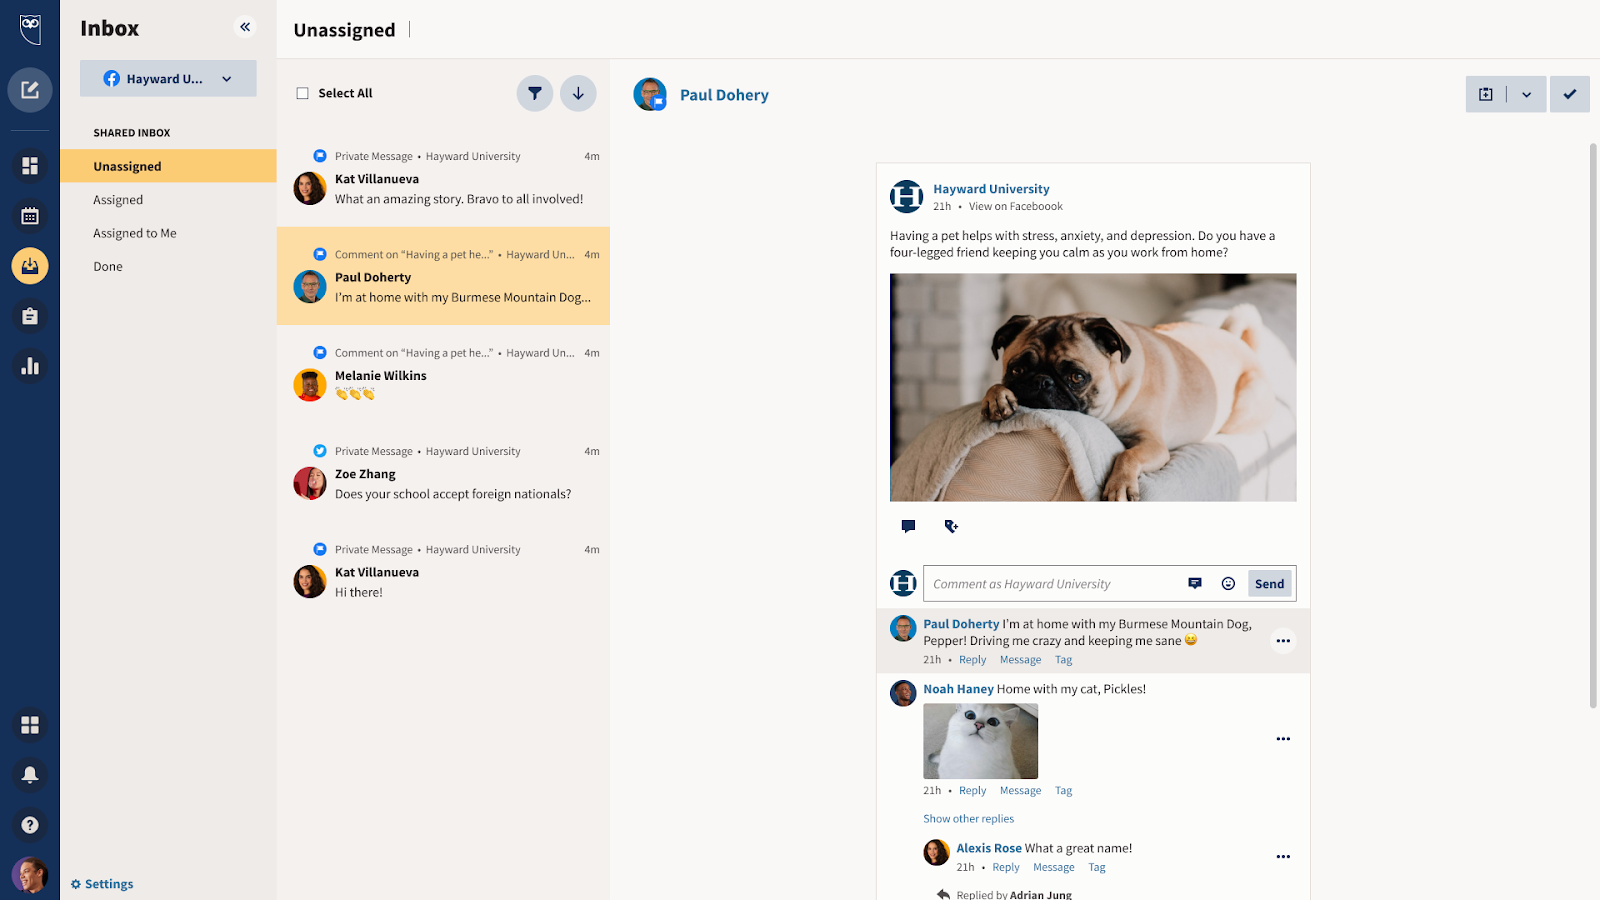 Hootsuite Software - Customer Engagement: Never miss a message and respond to customer inquiries faster with a consolidated stream of messages across networks that can be triaged and assigned. Provides optional chatbot handover for automated responses.